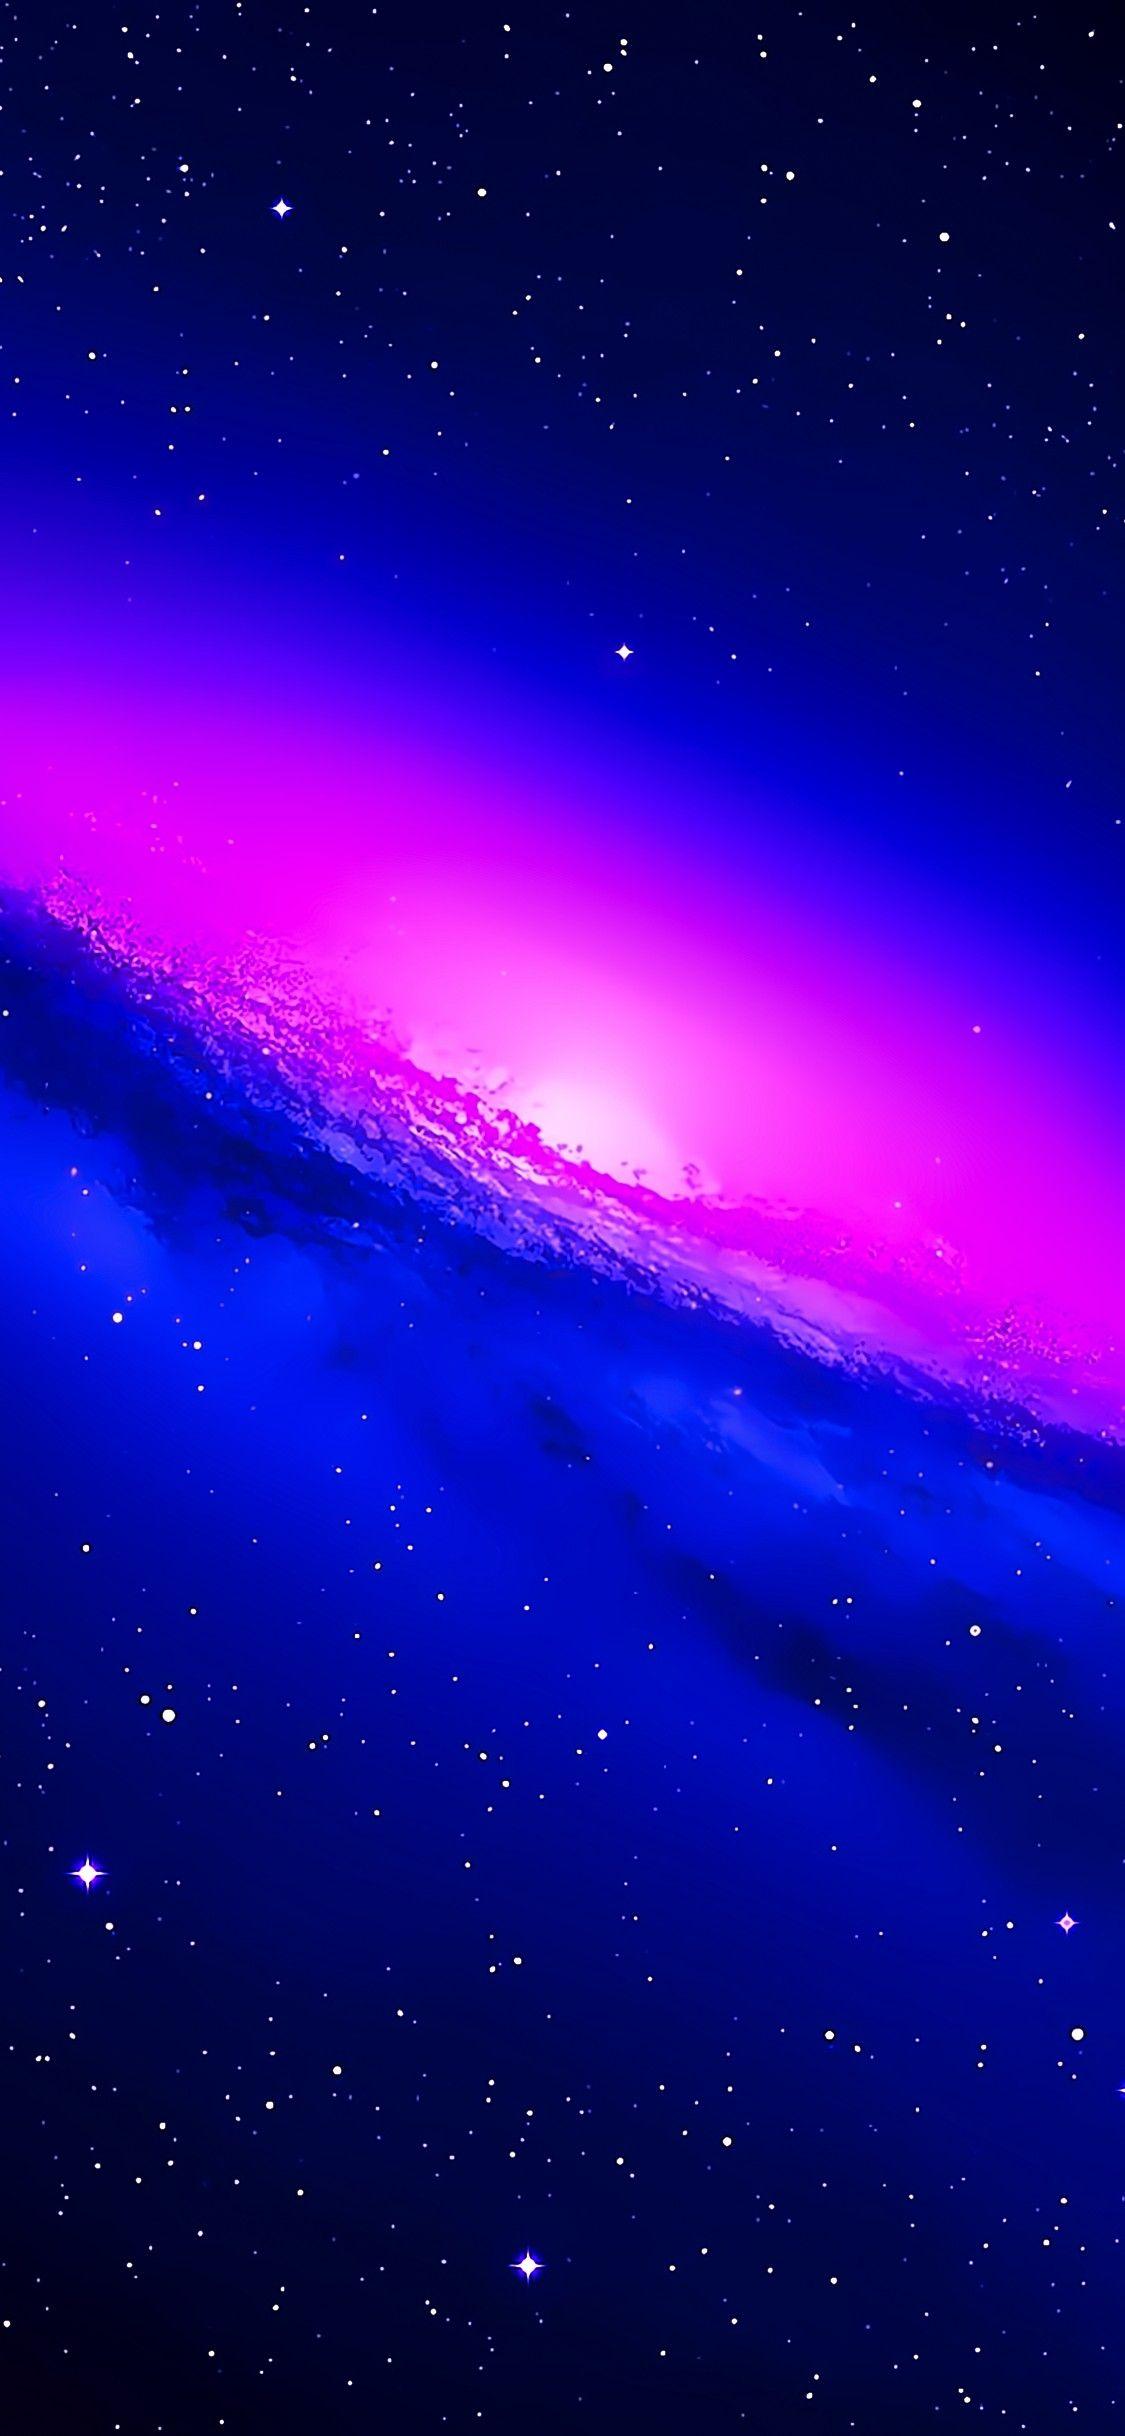 Wallpaper Background Texture Patterns of Galaxy in Blue Color